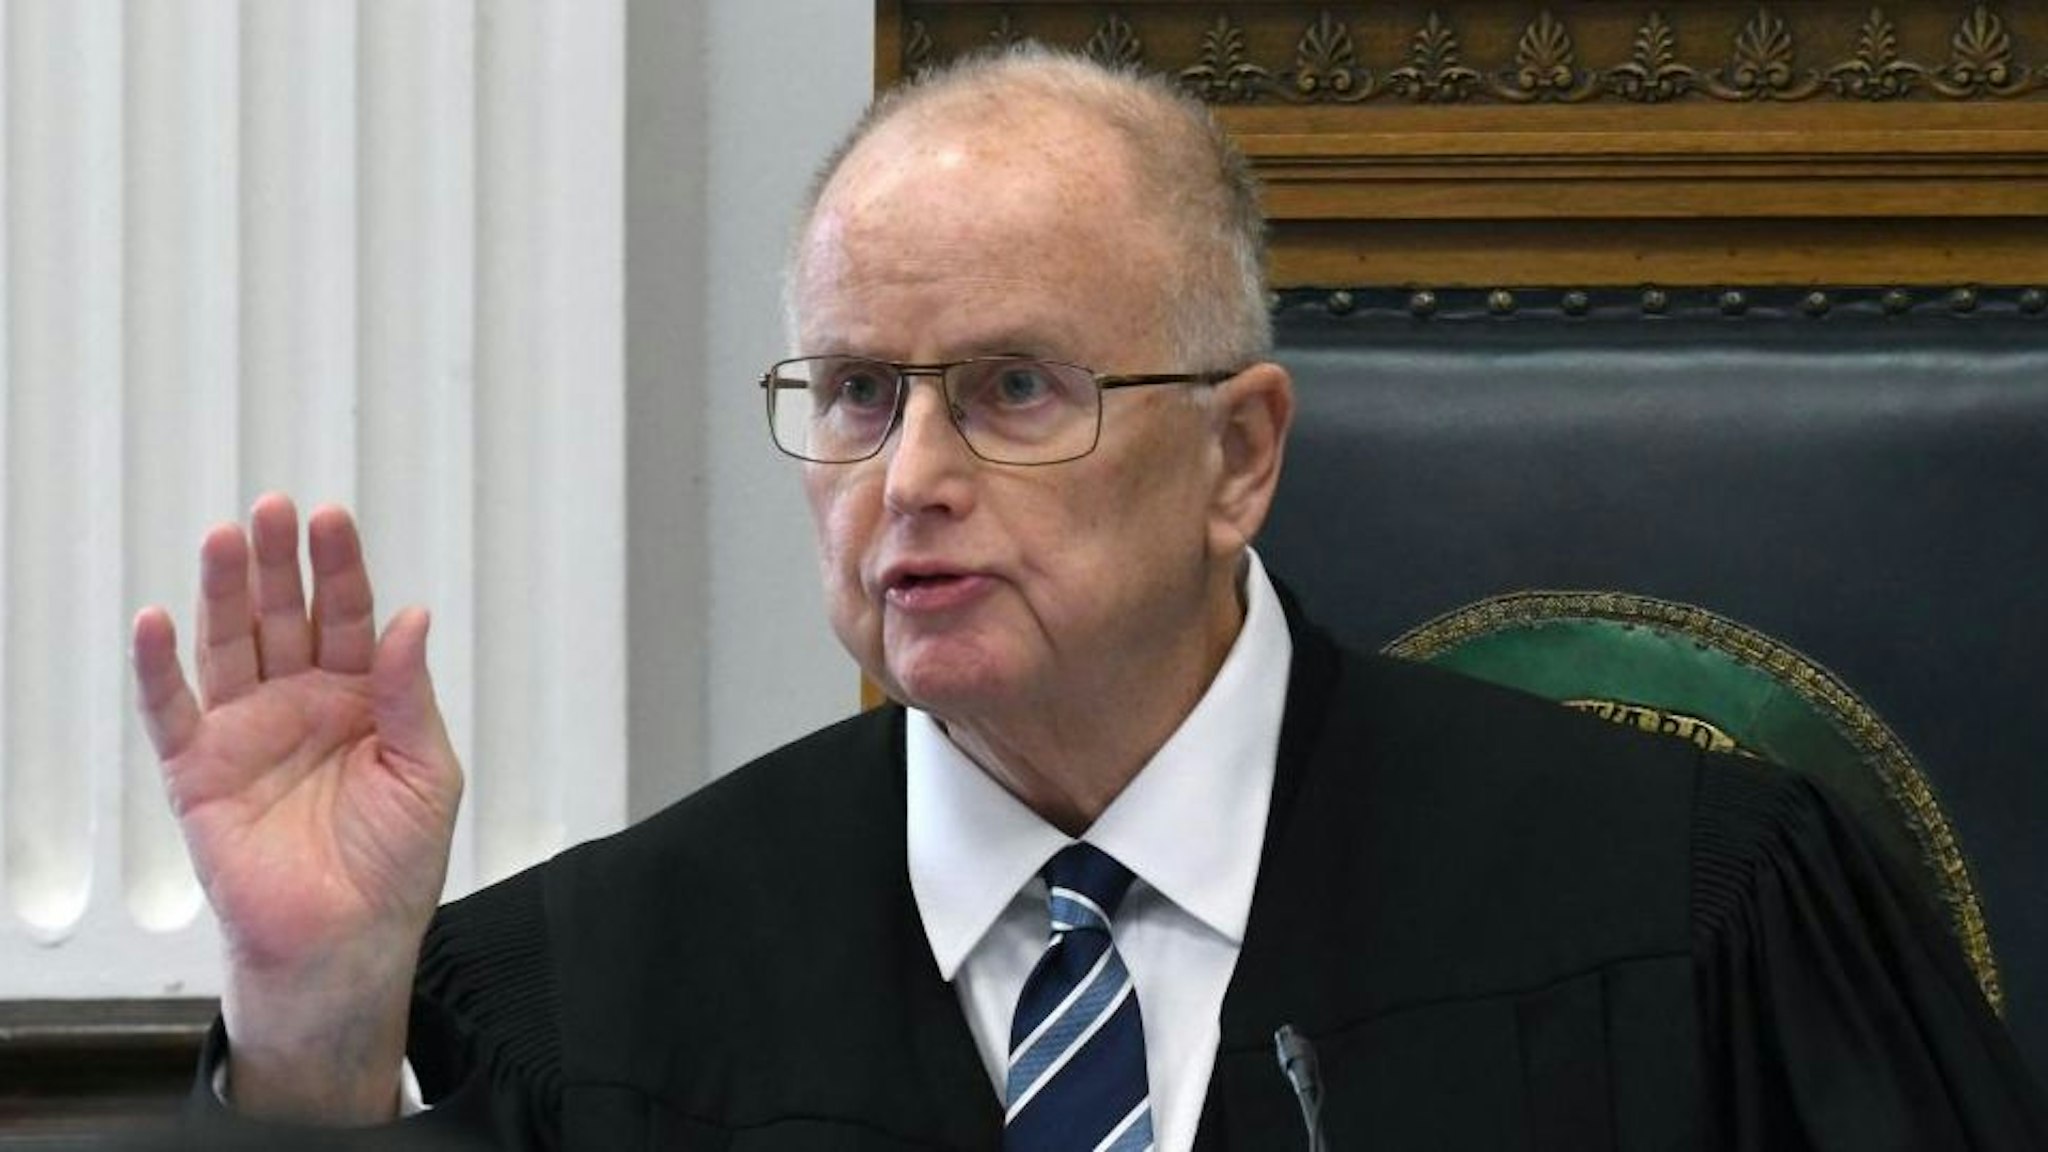 JUDGE BRUCE E. SCHROEDER during jury selection on the first day of the Kyle Rittenhouse trial in Kenosha (Wisconsin) Circuit Court on November 1, 2021 in Kenosha, Wisconsin.